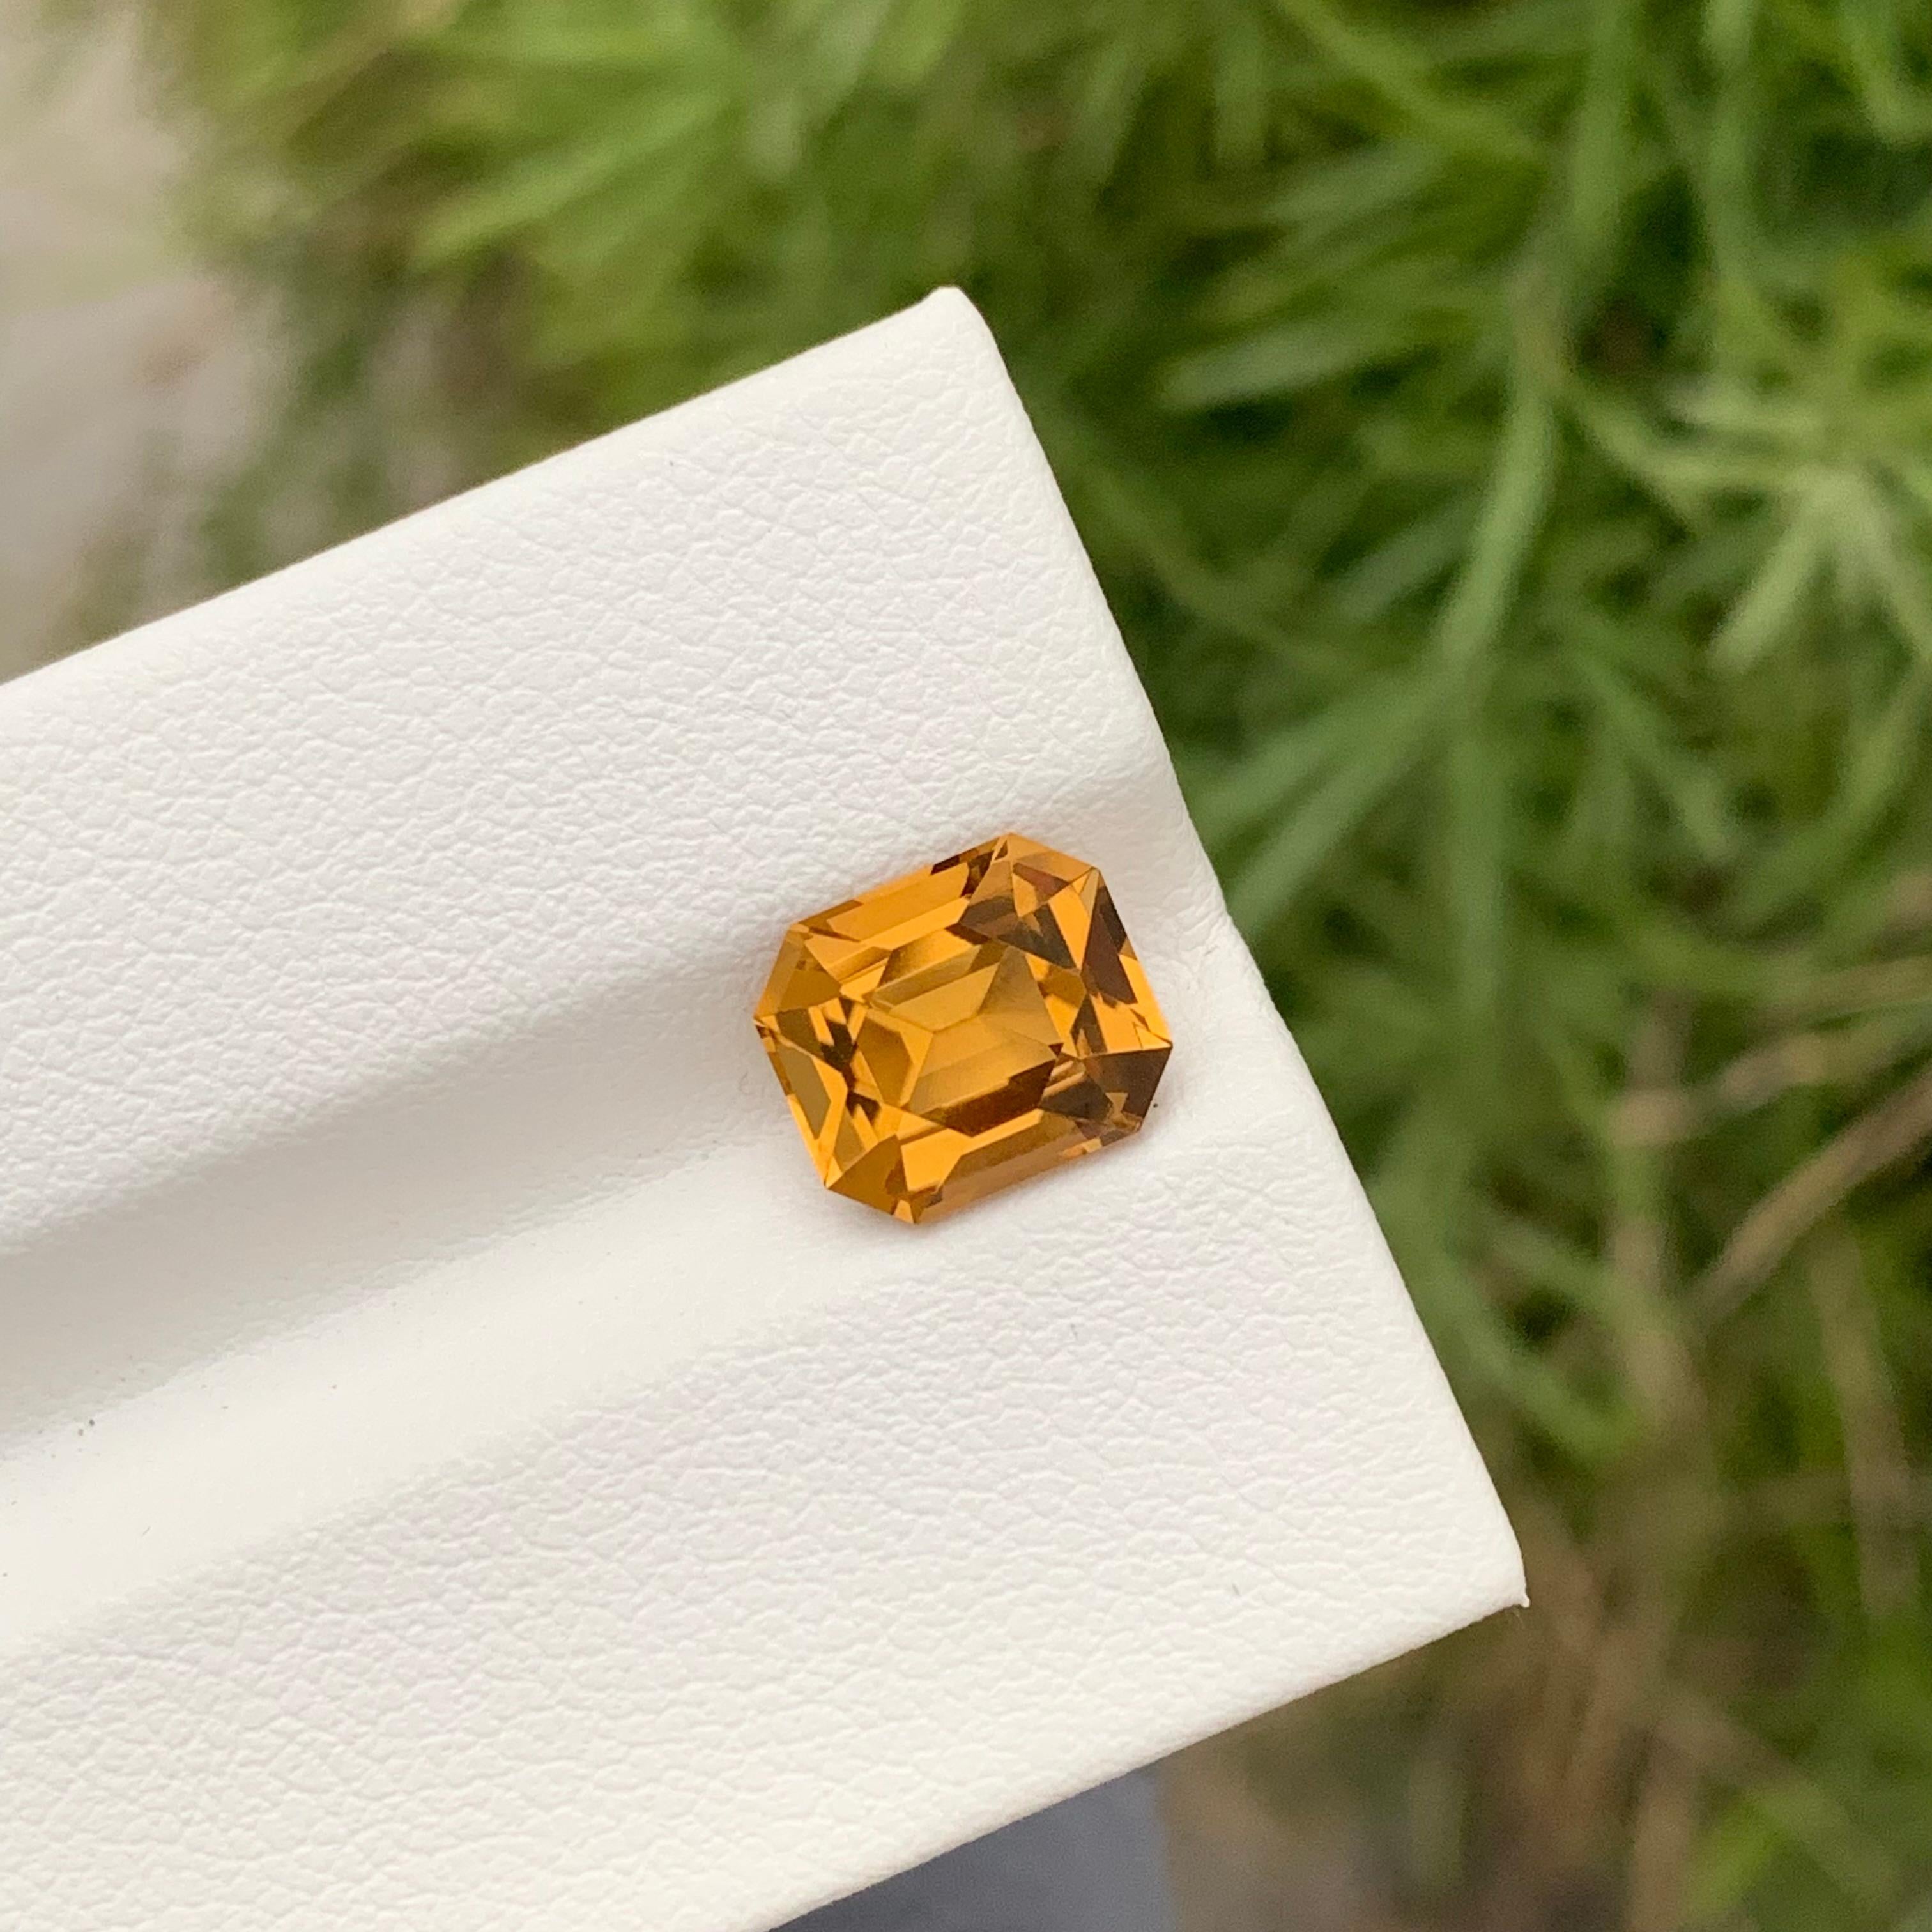 Loose Citrine
Weight: 2.45 Carats
Dimension: 8.9 x 7.7 x 5.7 Mm
Origin: Brazil
Colour: Honey Brown
Treatment: Non
Certficate: On Demand
Shape: Emerald 


Citrine, a radiant and versatile gemstone, enchants with its warm, golden hues and remarkable